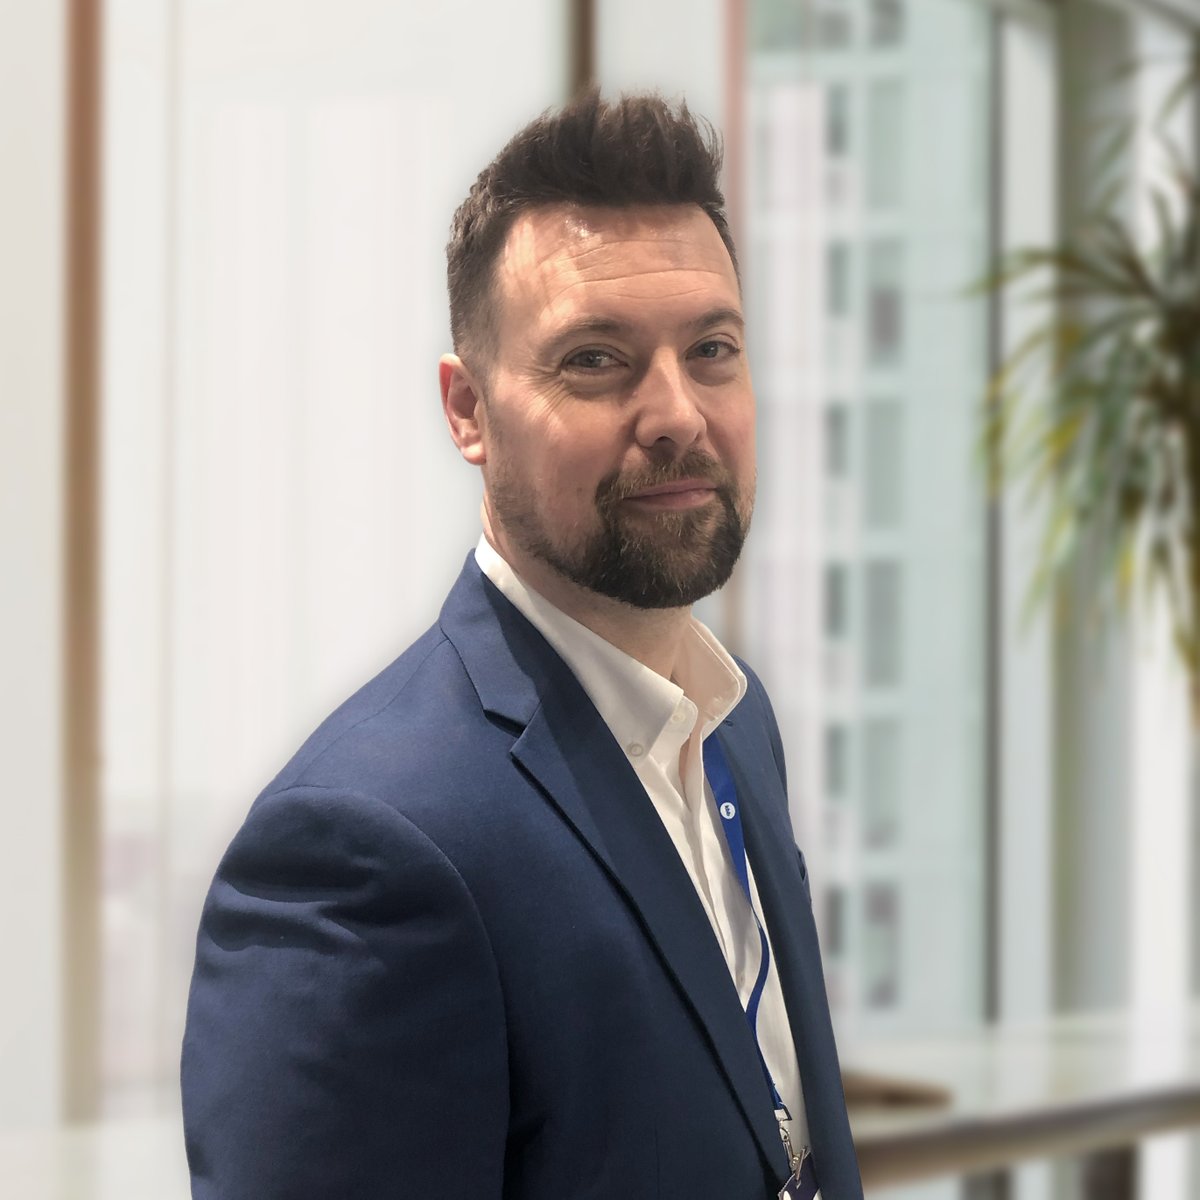 Meet Dan Vass, our latest addition. With over 20 years' experience, Dan brings a wealth of knowledge and a fresh perspective covering the South West. Dan values relationships and is keen to contribute his deep understanding of fit, feel, and finish to our projects. Welcome, Dan!